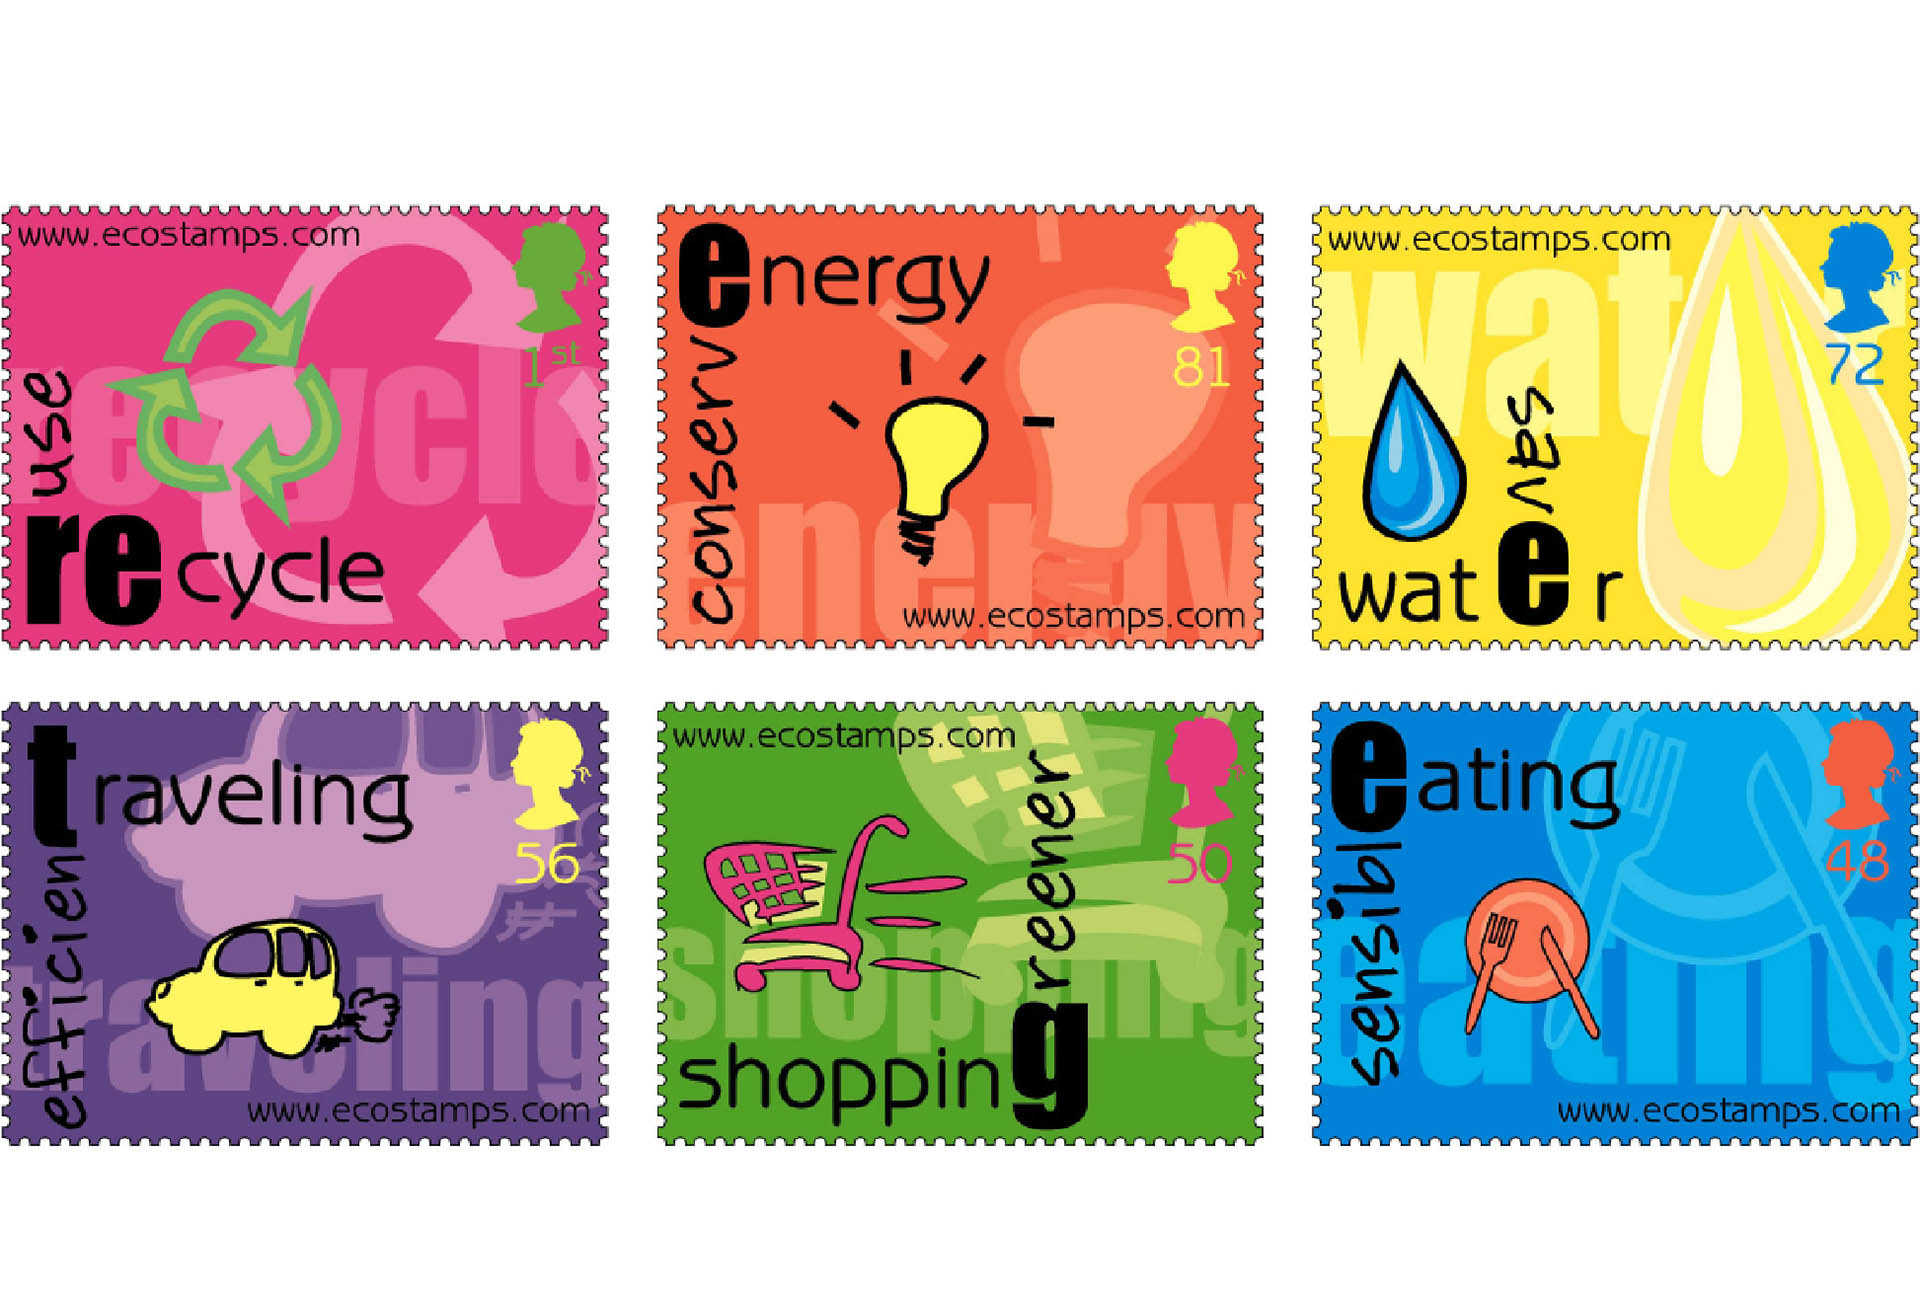 Stamp design for the Royal Mail, promoting energy conservation and alternate sources of energy